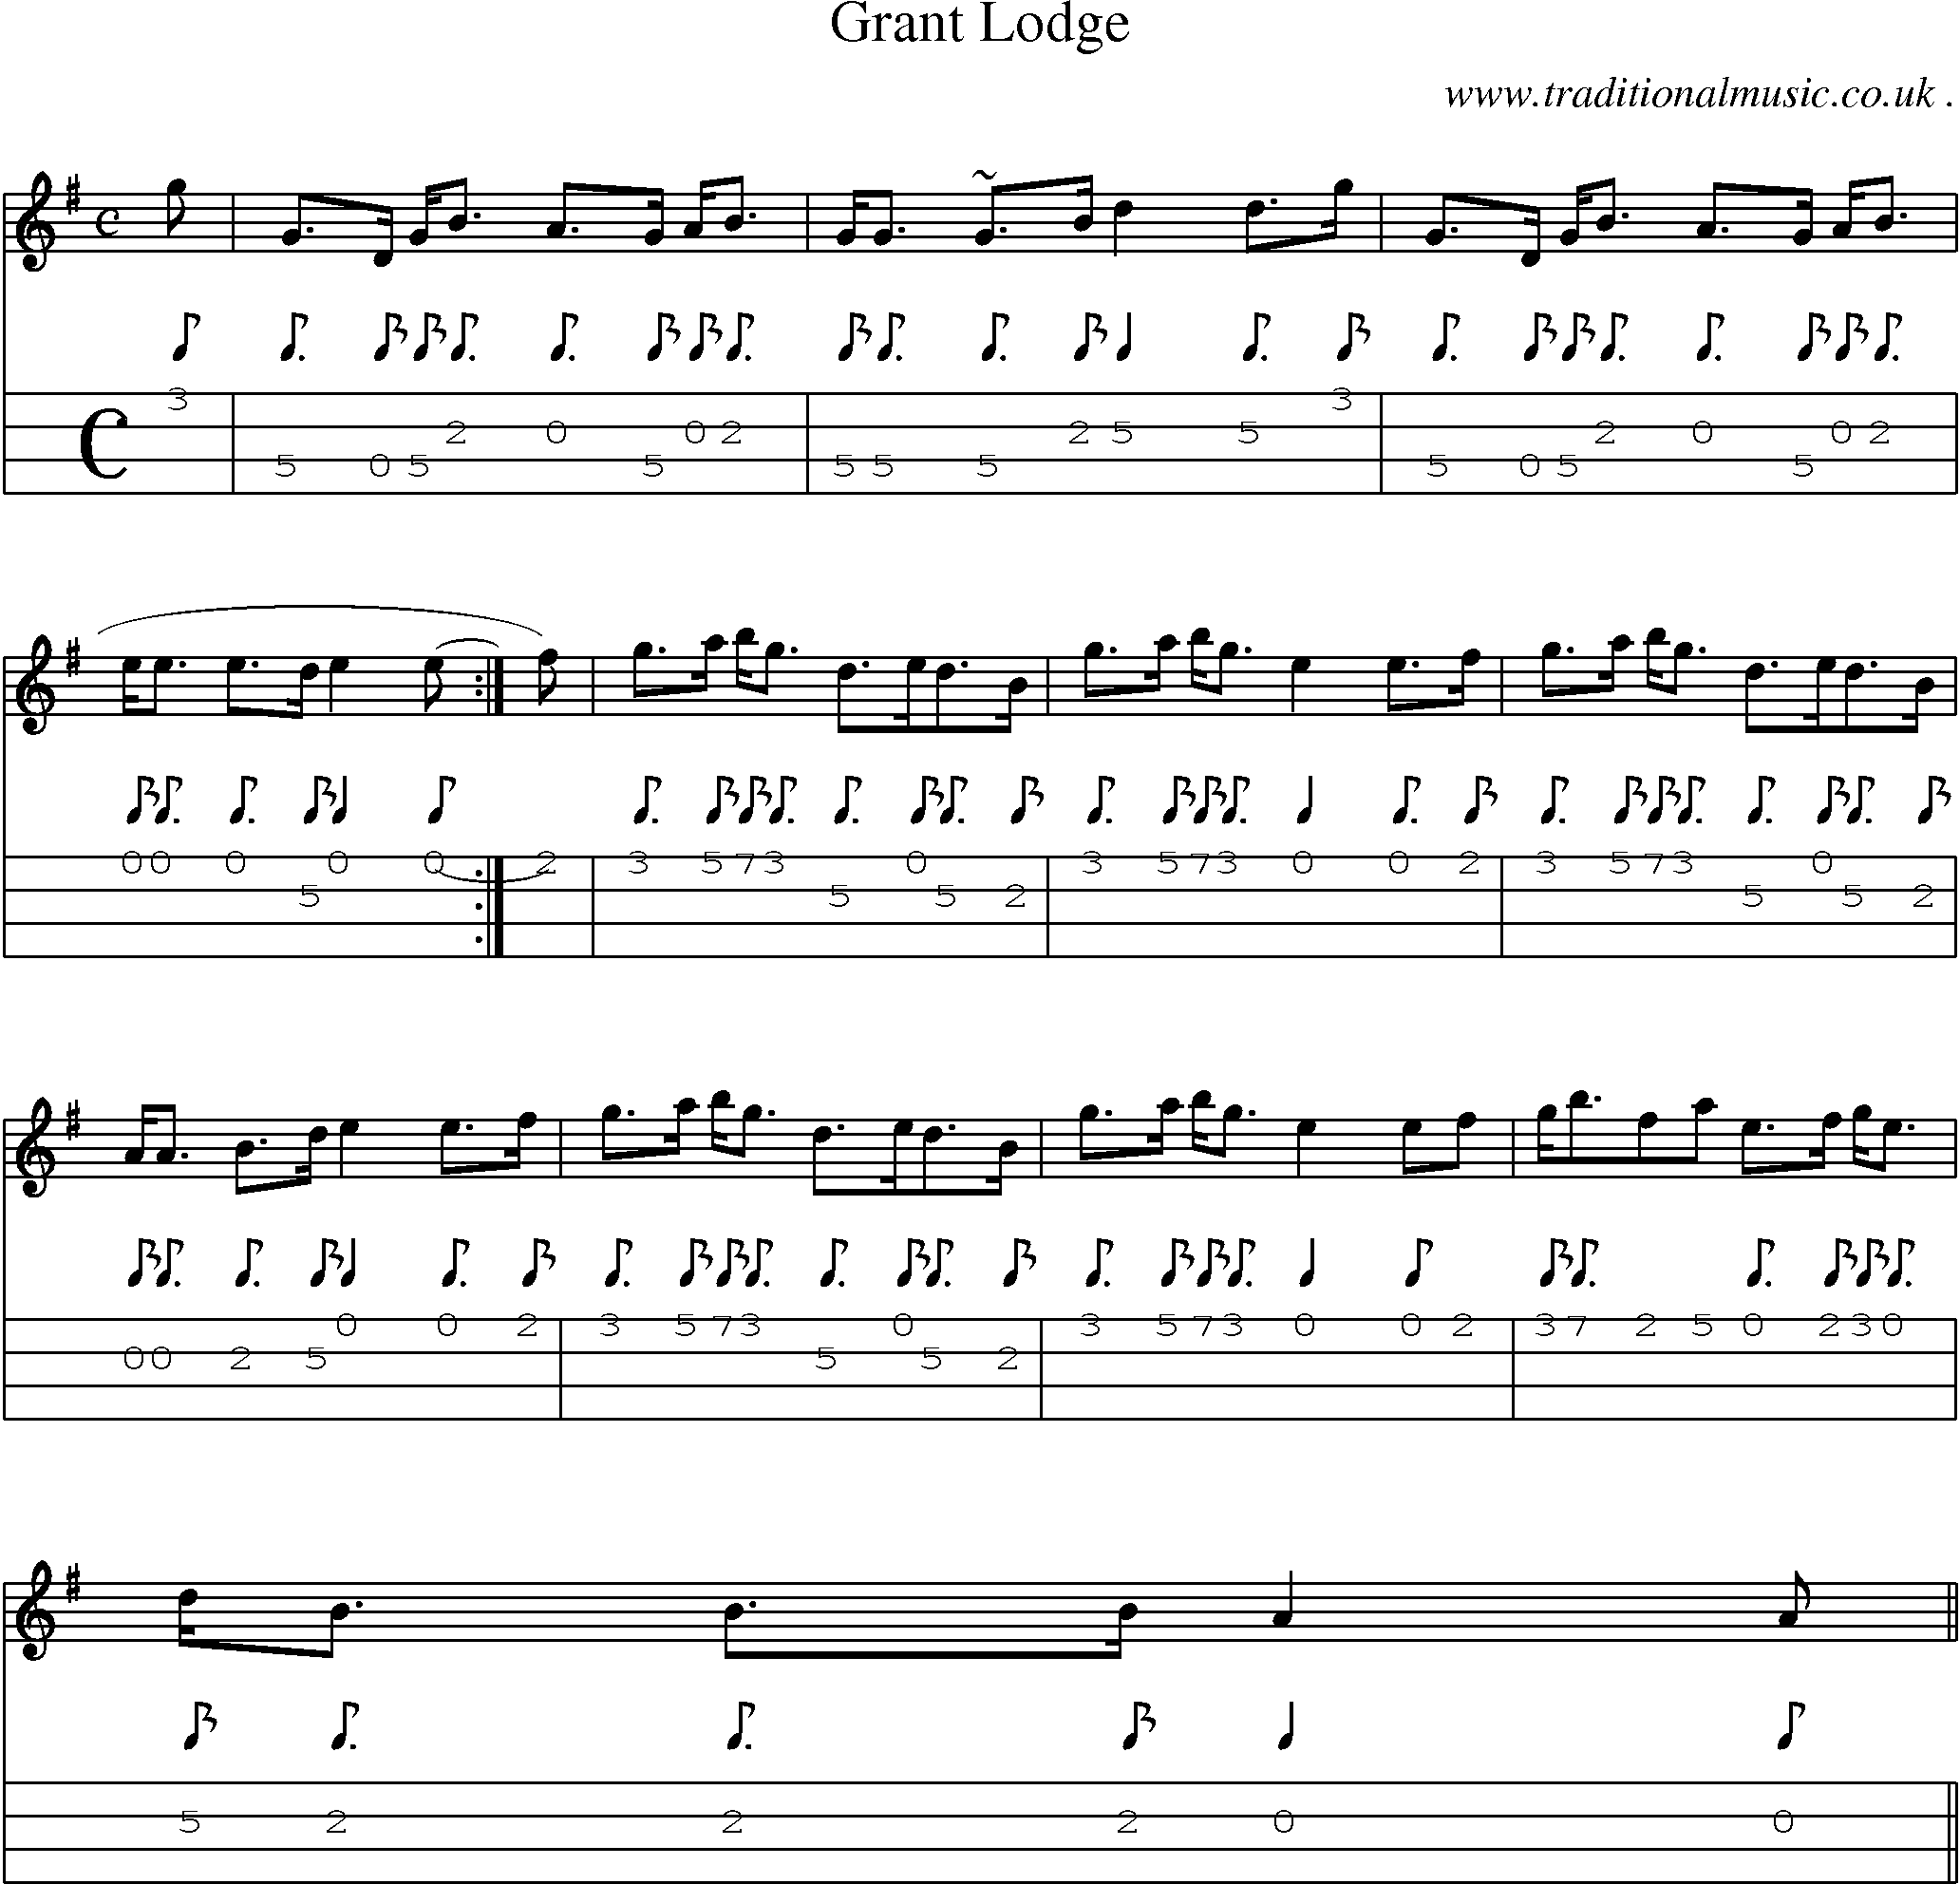 Sheet-music  score, Chords and Mandolin Tabs for Grant Lodge